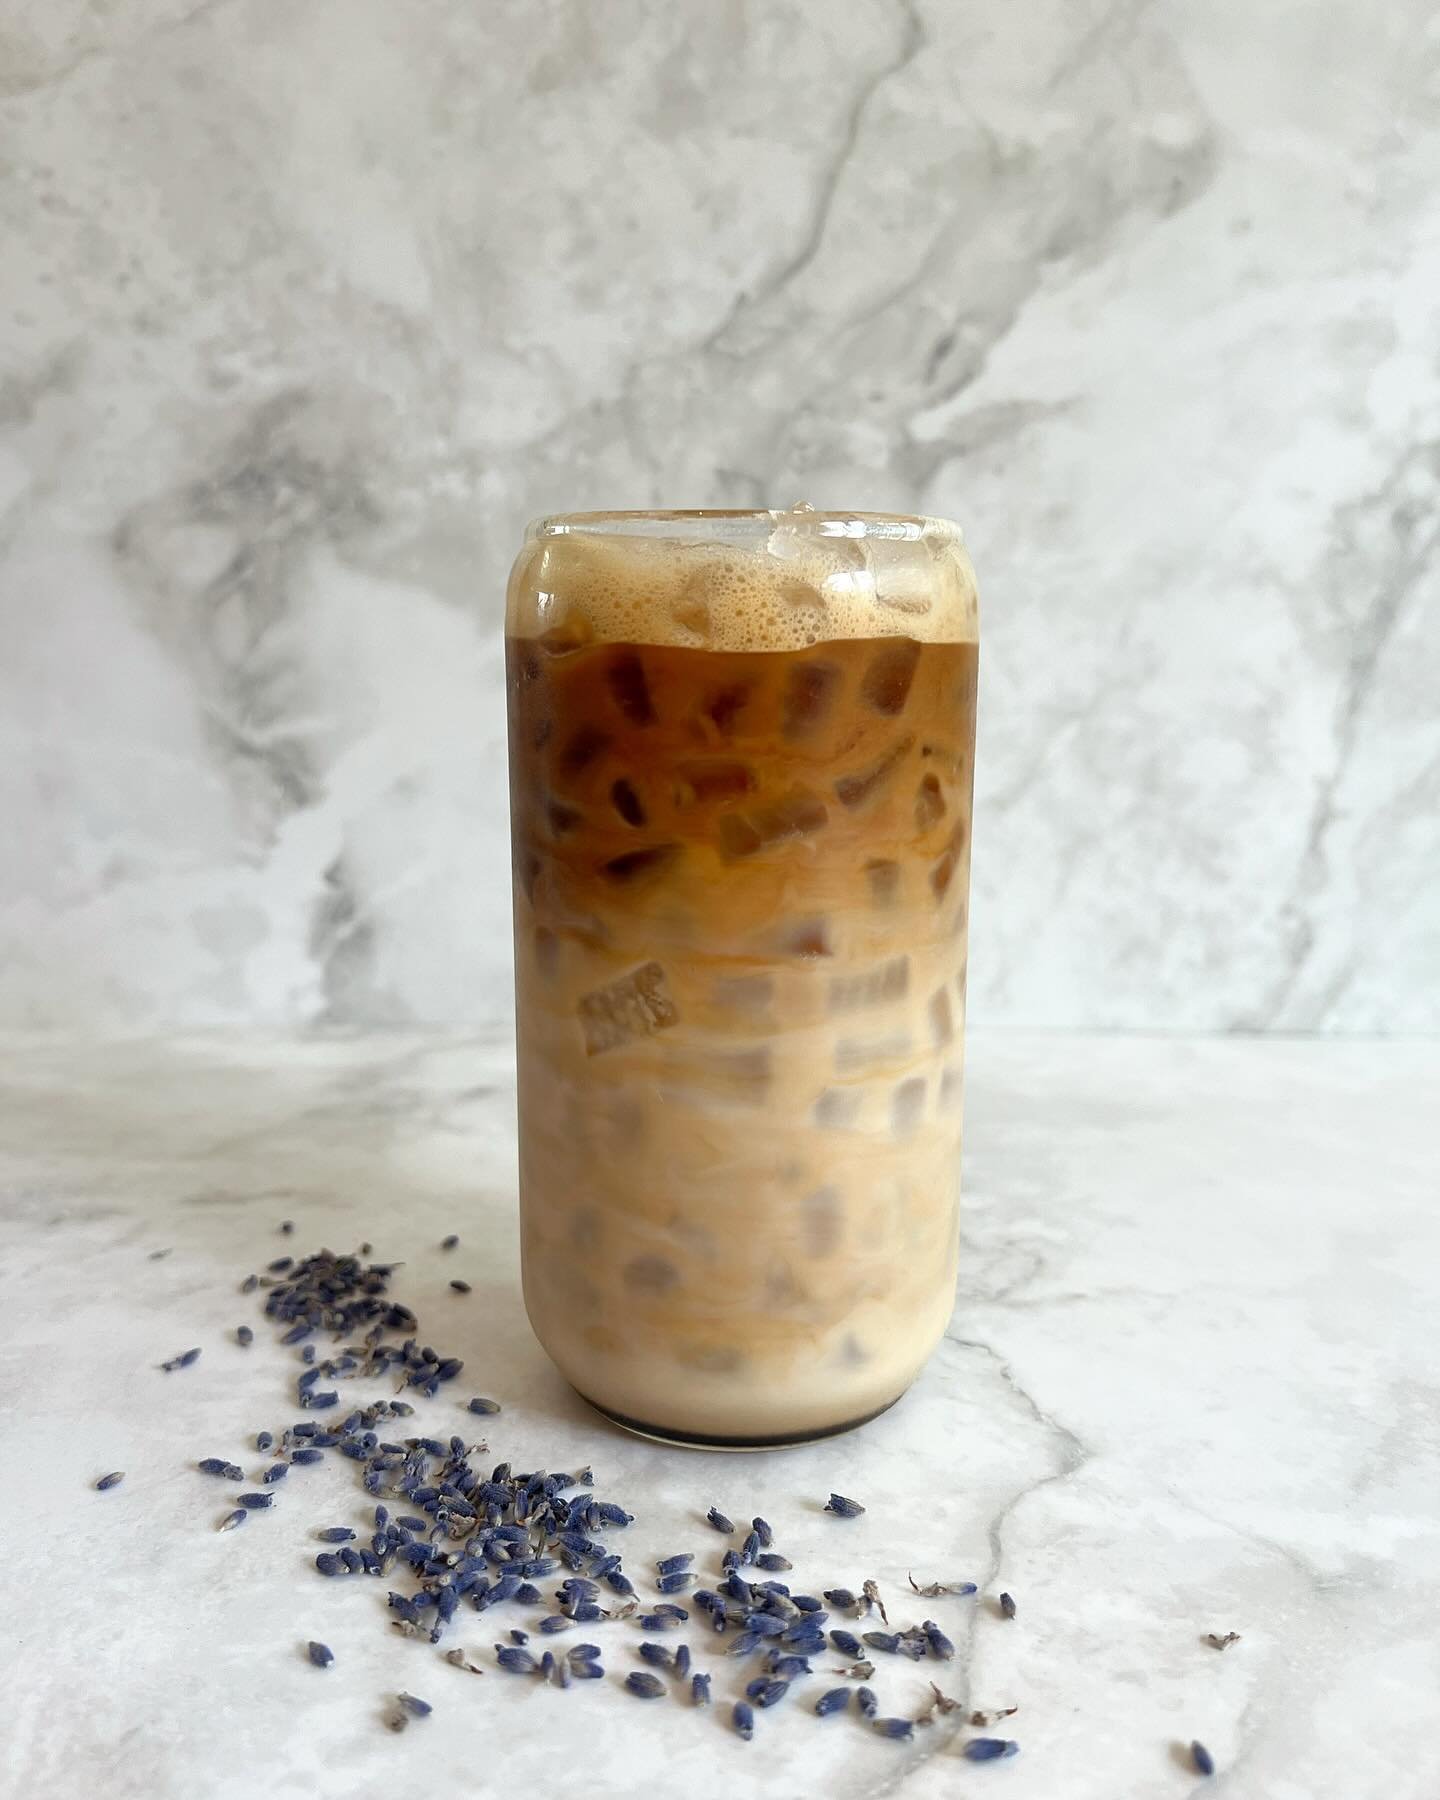 my it girl will always be an iced lav oat latte with extra ice (preferably the crunchy kind). 🪻 what&rsquo;s your go to order? 

#mobilecoffeecart #njcoffee #mobilecoffeebar #njmobilecoffeecart #goldencoffeenj #comingsoon #njsmallbusiness #espressob